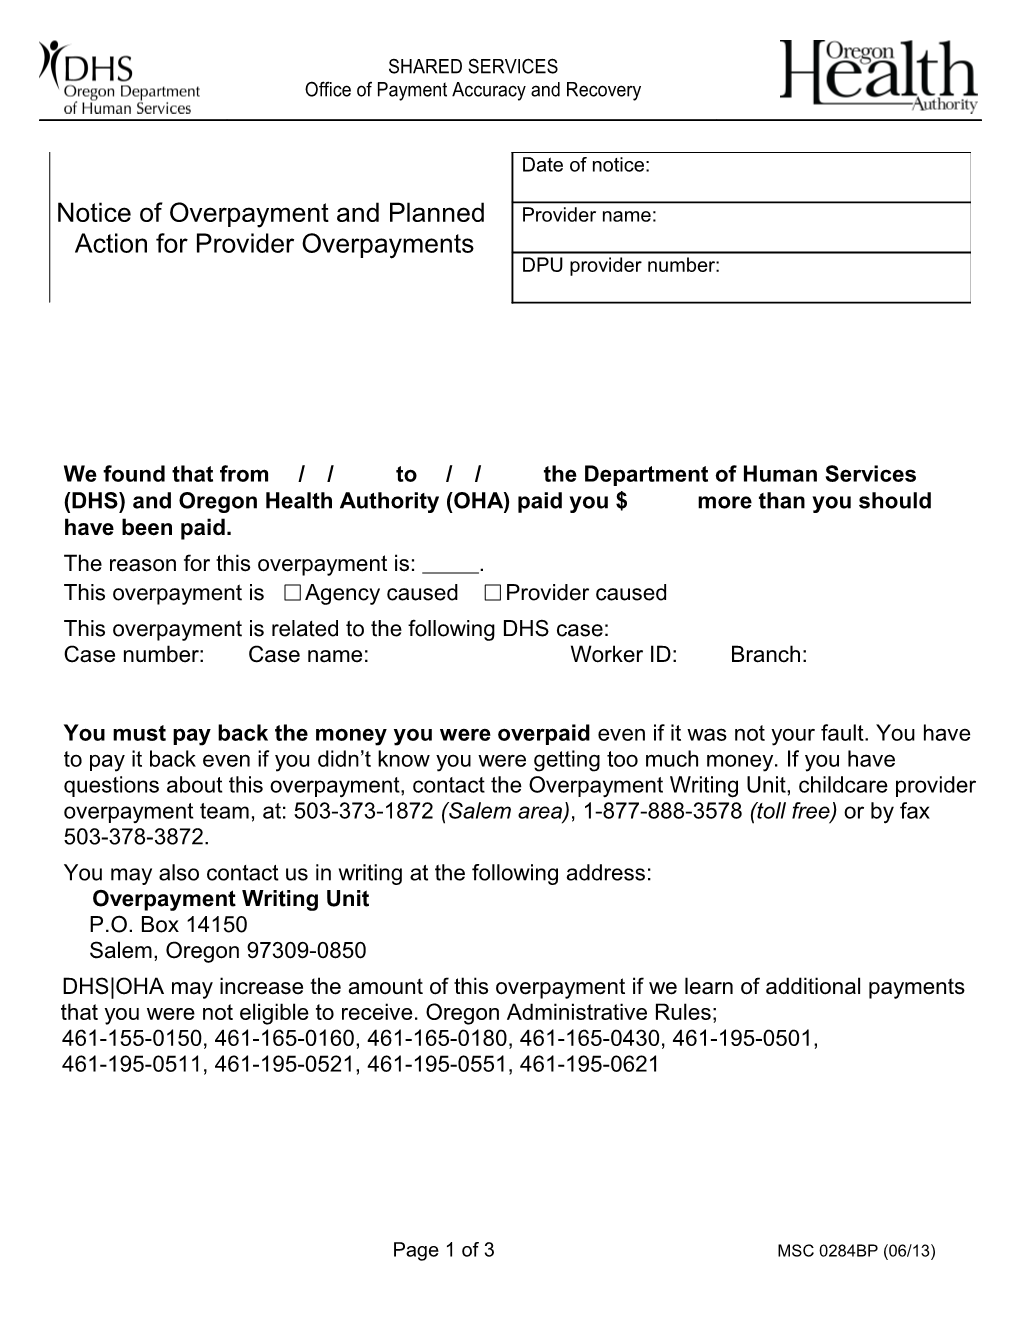 Notice of Overpayment and Planned Action for Provider Overpayments MSC 284 BP 6/13